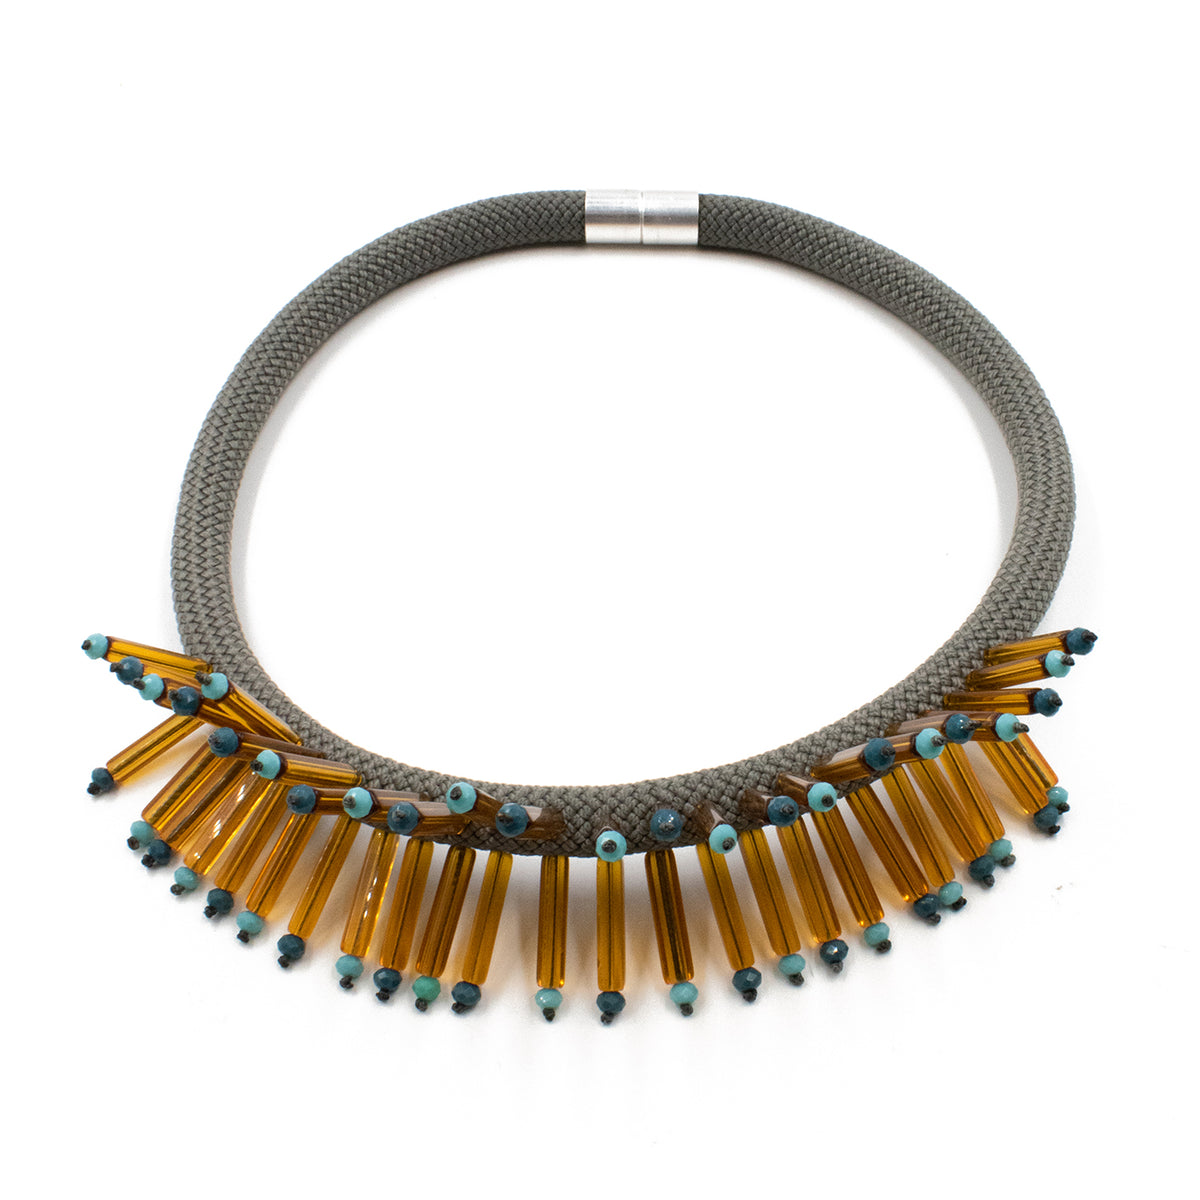 CB343 - Bead Rope Necklace in Tanmix